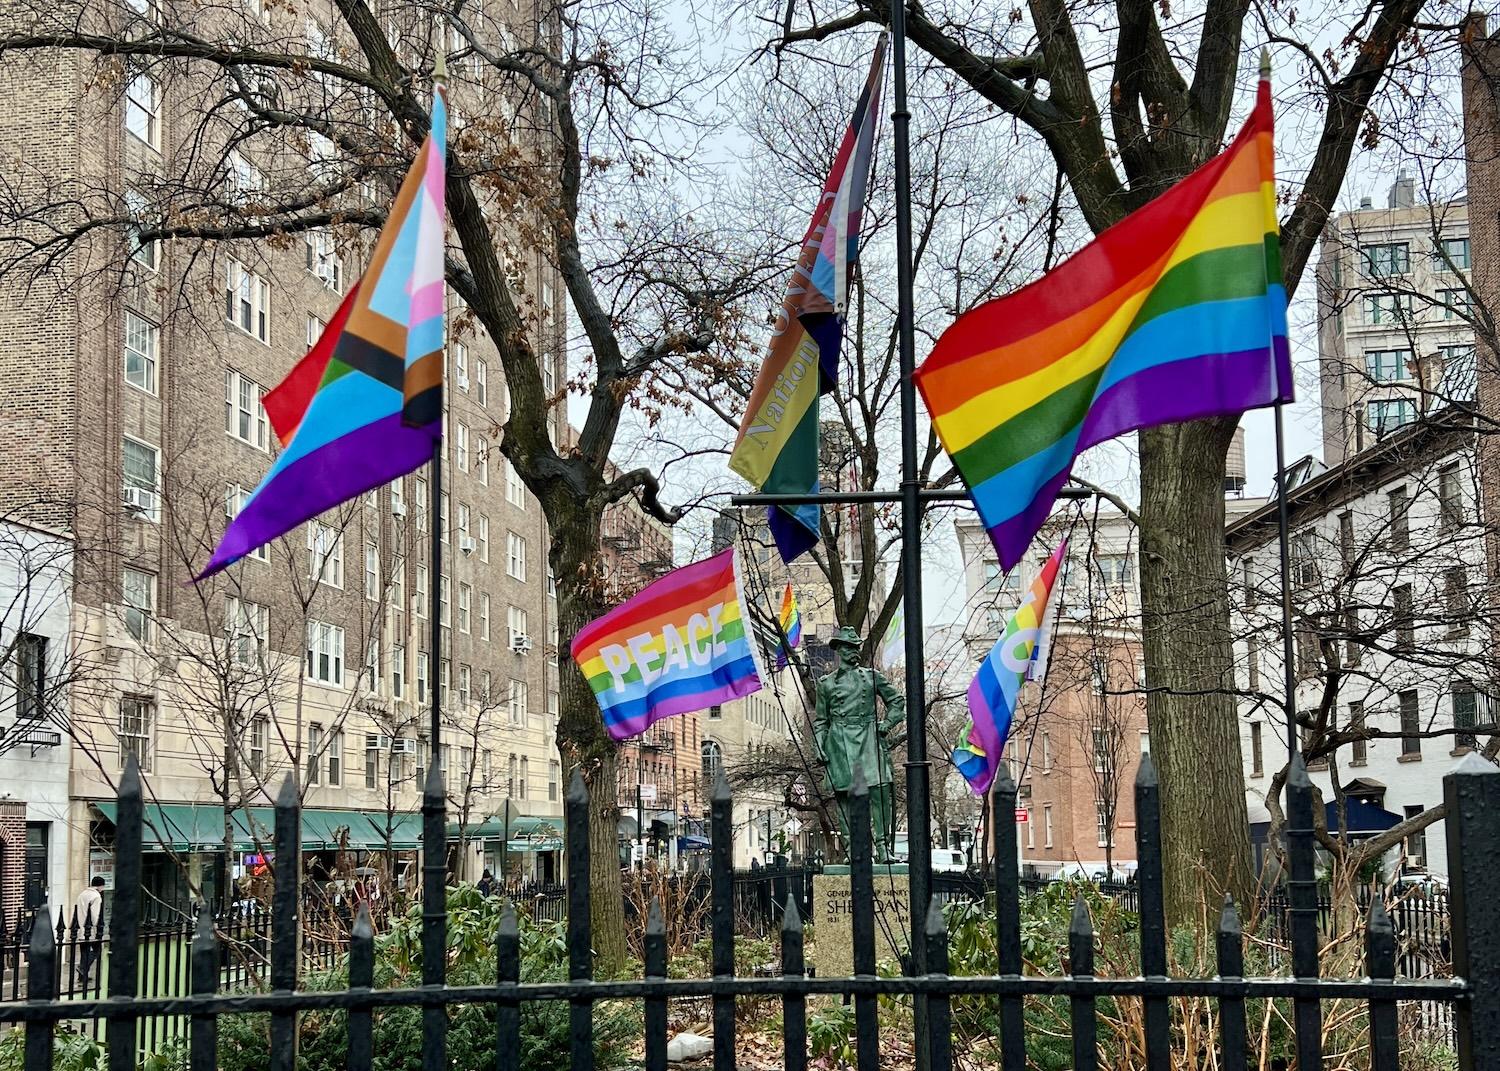 At Stonewall National Monument, various pride flags flutter in front of the statue of a Civil War general.